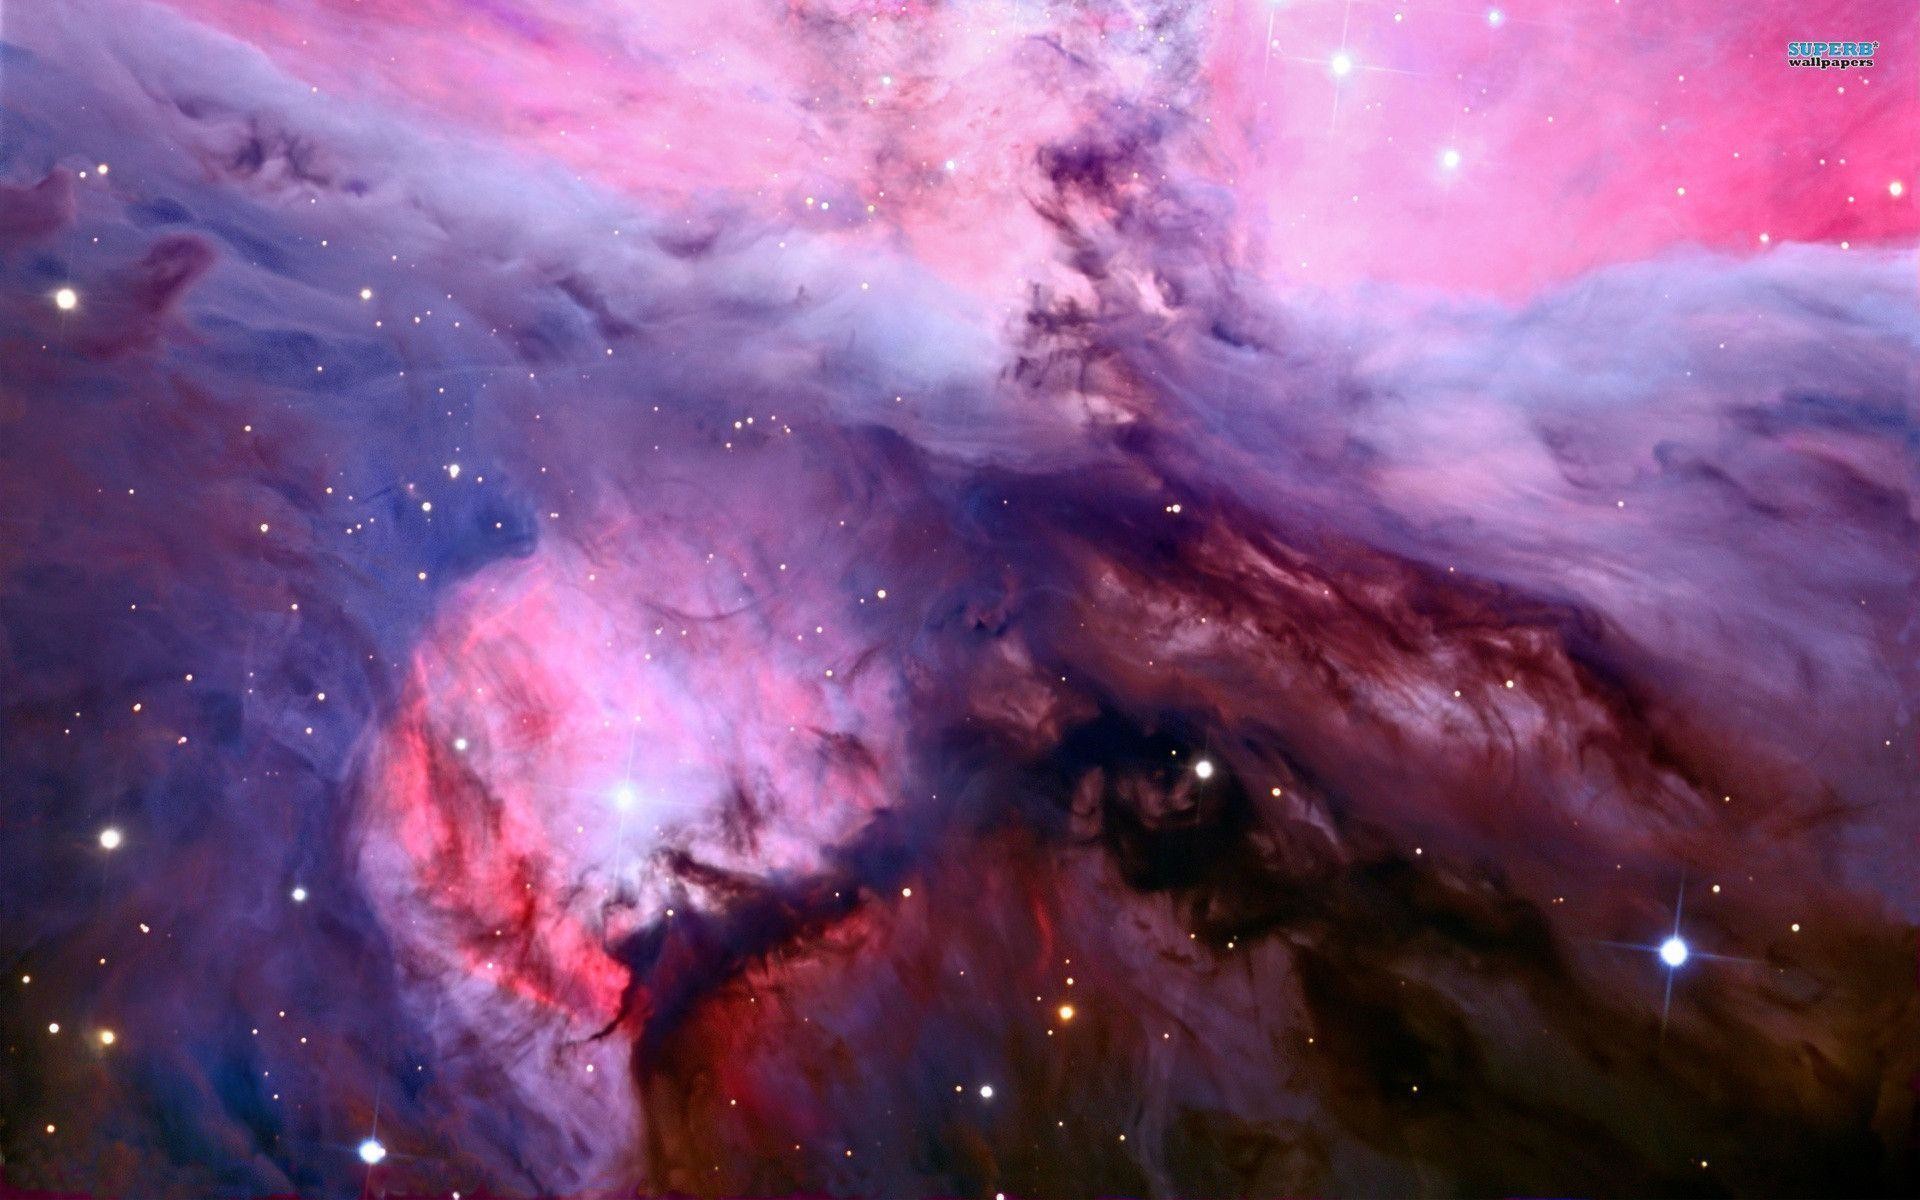 Download wallpaper 1350x2400 orion nebula nebula galaxy stars light  space iphone 876s6 for parallax hd background